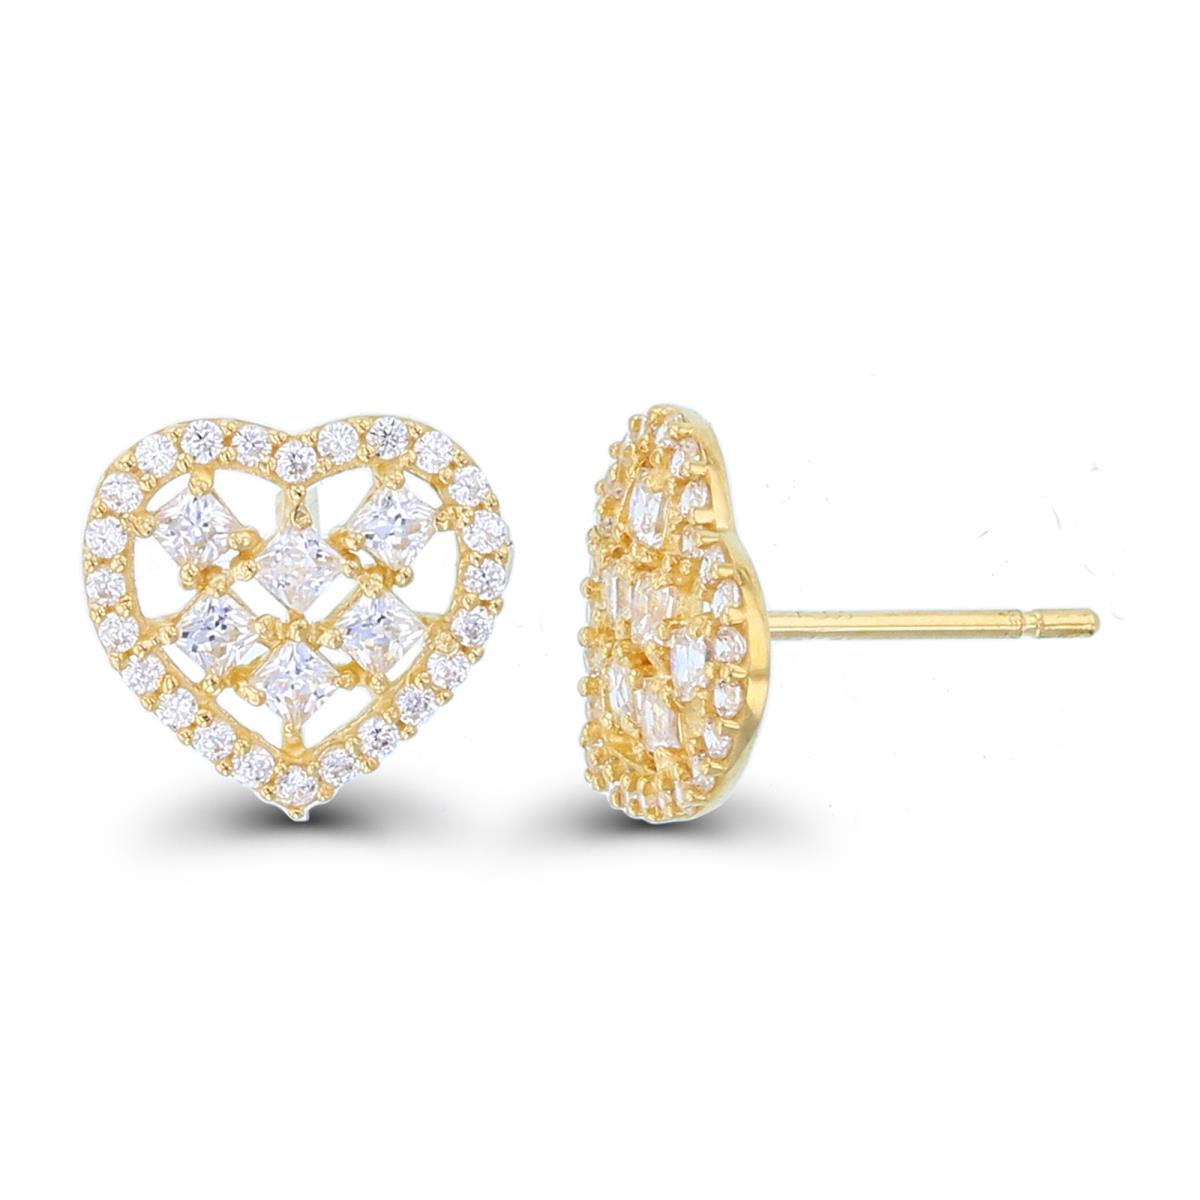 10K Yellow Gold Rnd & SQ CZ Heart Studs with Silicon Backs